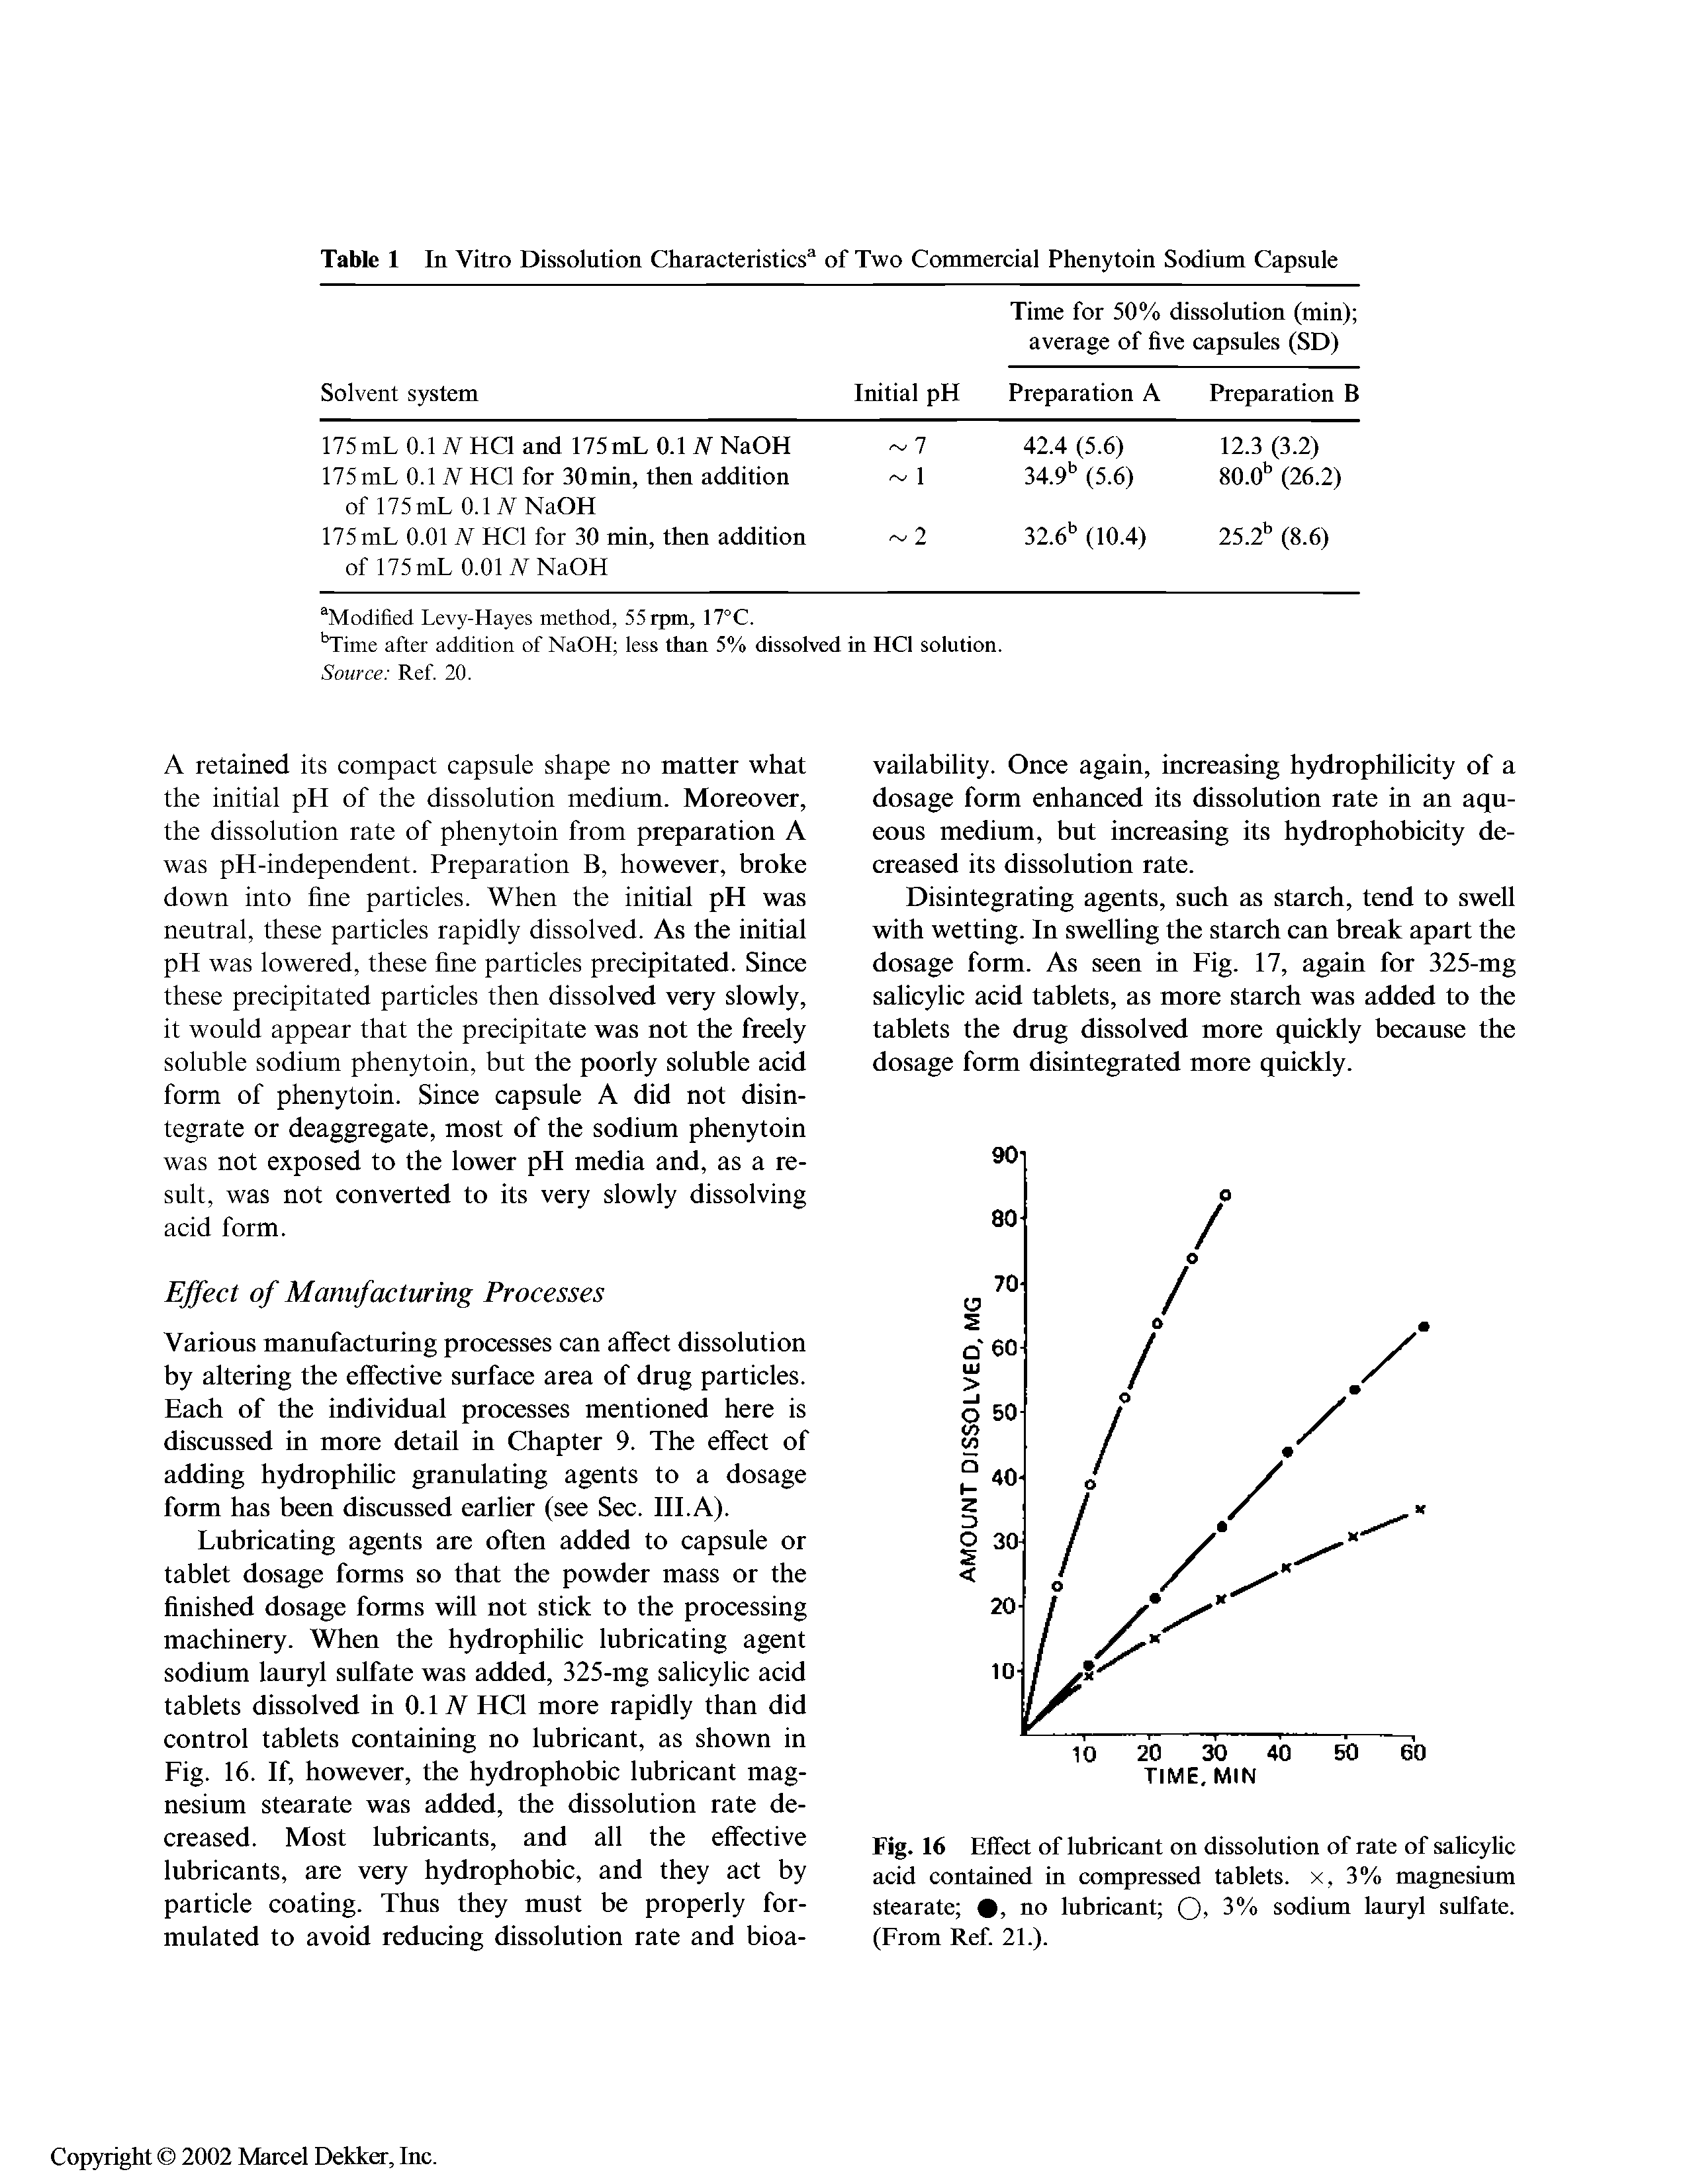 Fig. 16 Effect of lubricant on dissolution of rate of salicylic acid contained in compressed tablets, x, 3% magnesium stearate , no lubricant 0> 3% sodium lauryl sulfate. (From Ref. 21.).